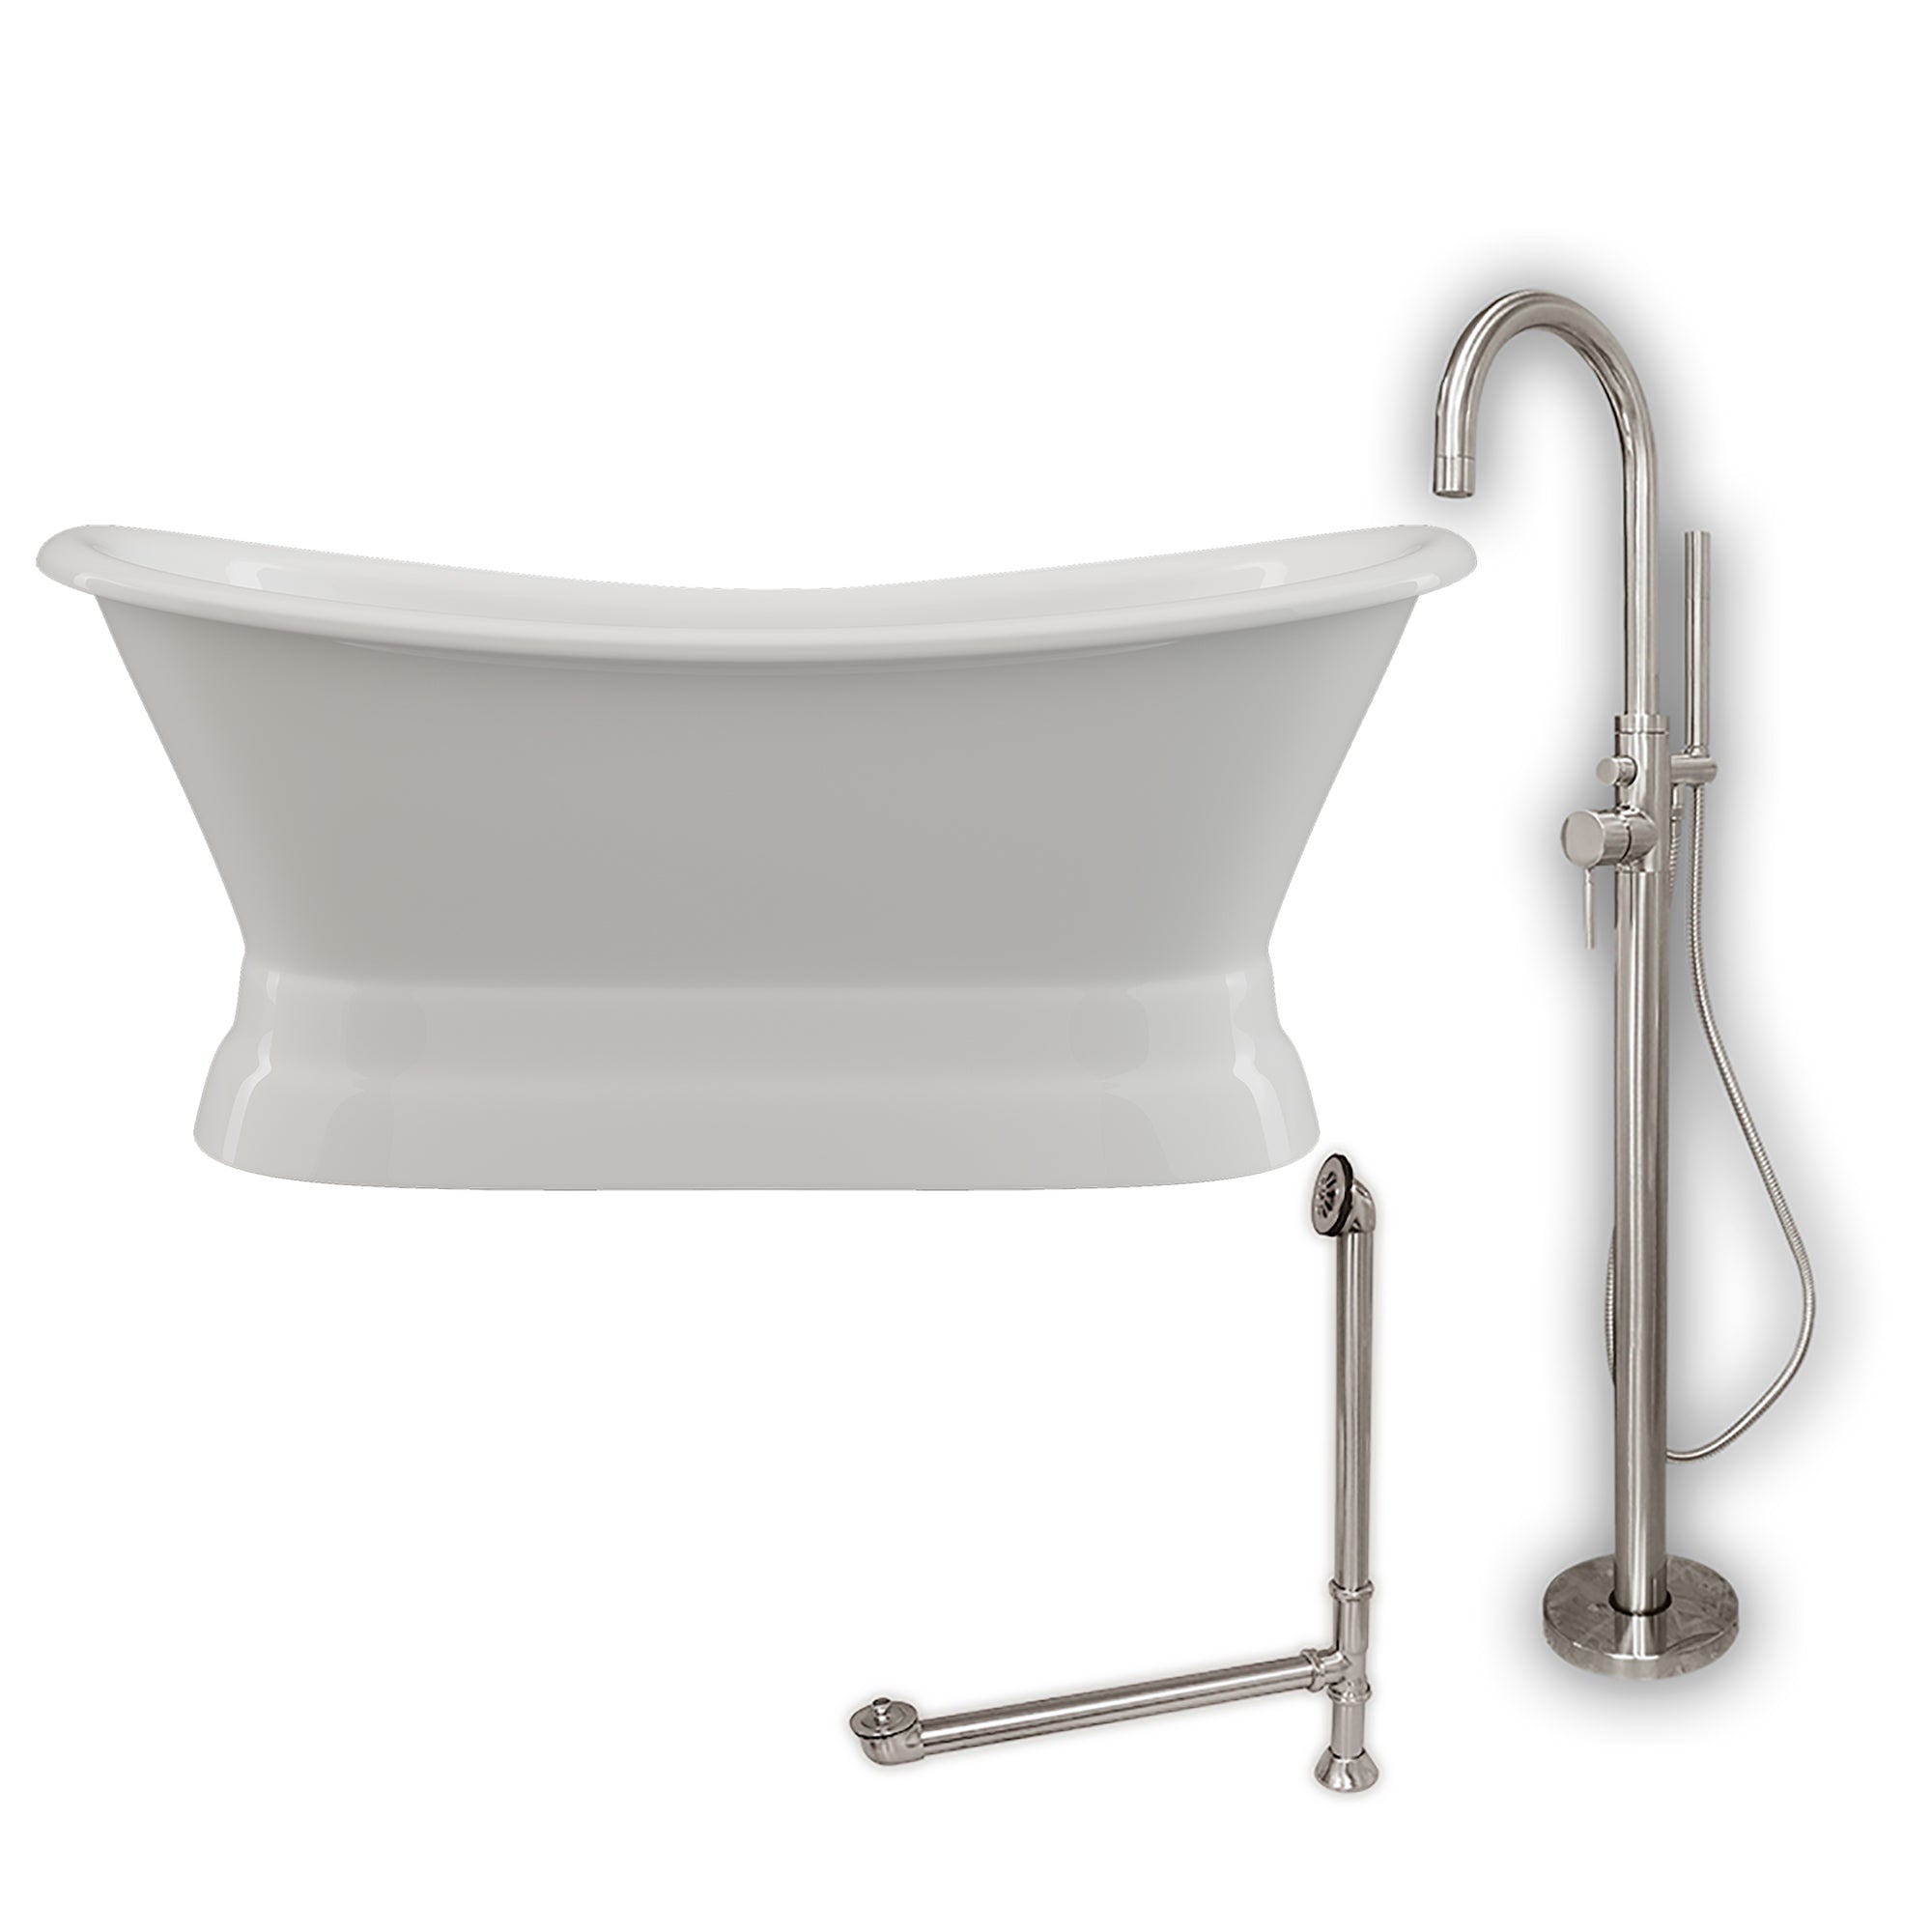 Cambridge Plumbing Double Slipper Cast Iron Pedestal Soaking Tub (Porcelain interior and white paint exterior) and Free-standing Plumbing Package (Brushed nickel) DES-PED-150-PKG-NH - Vital Hydrotherapy